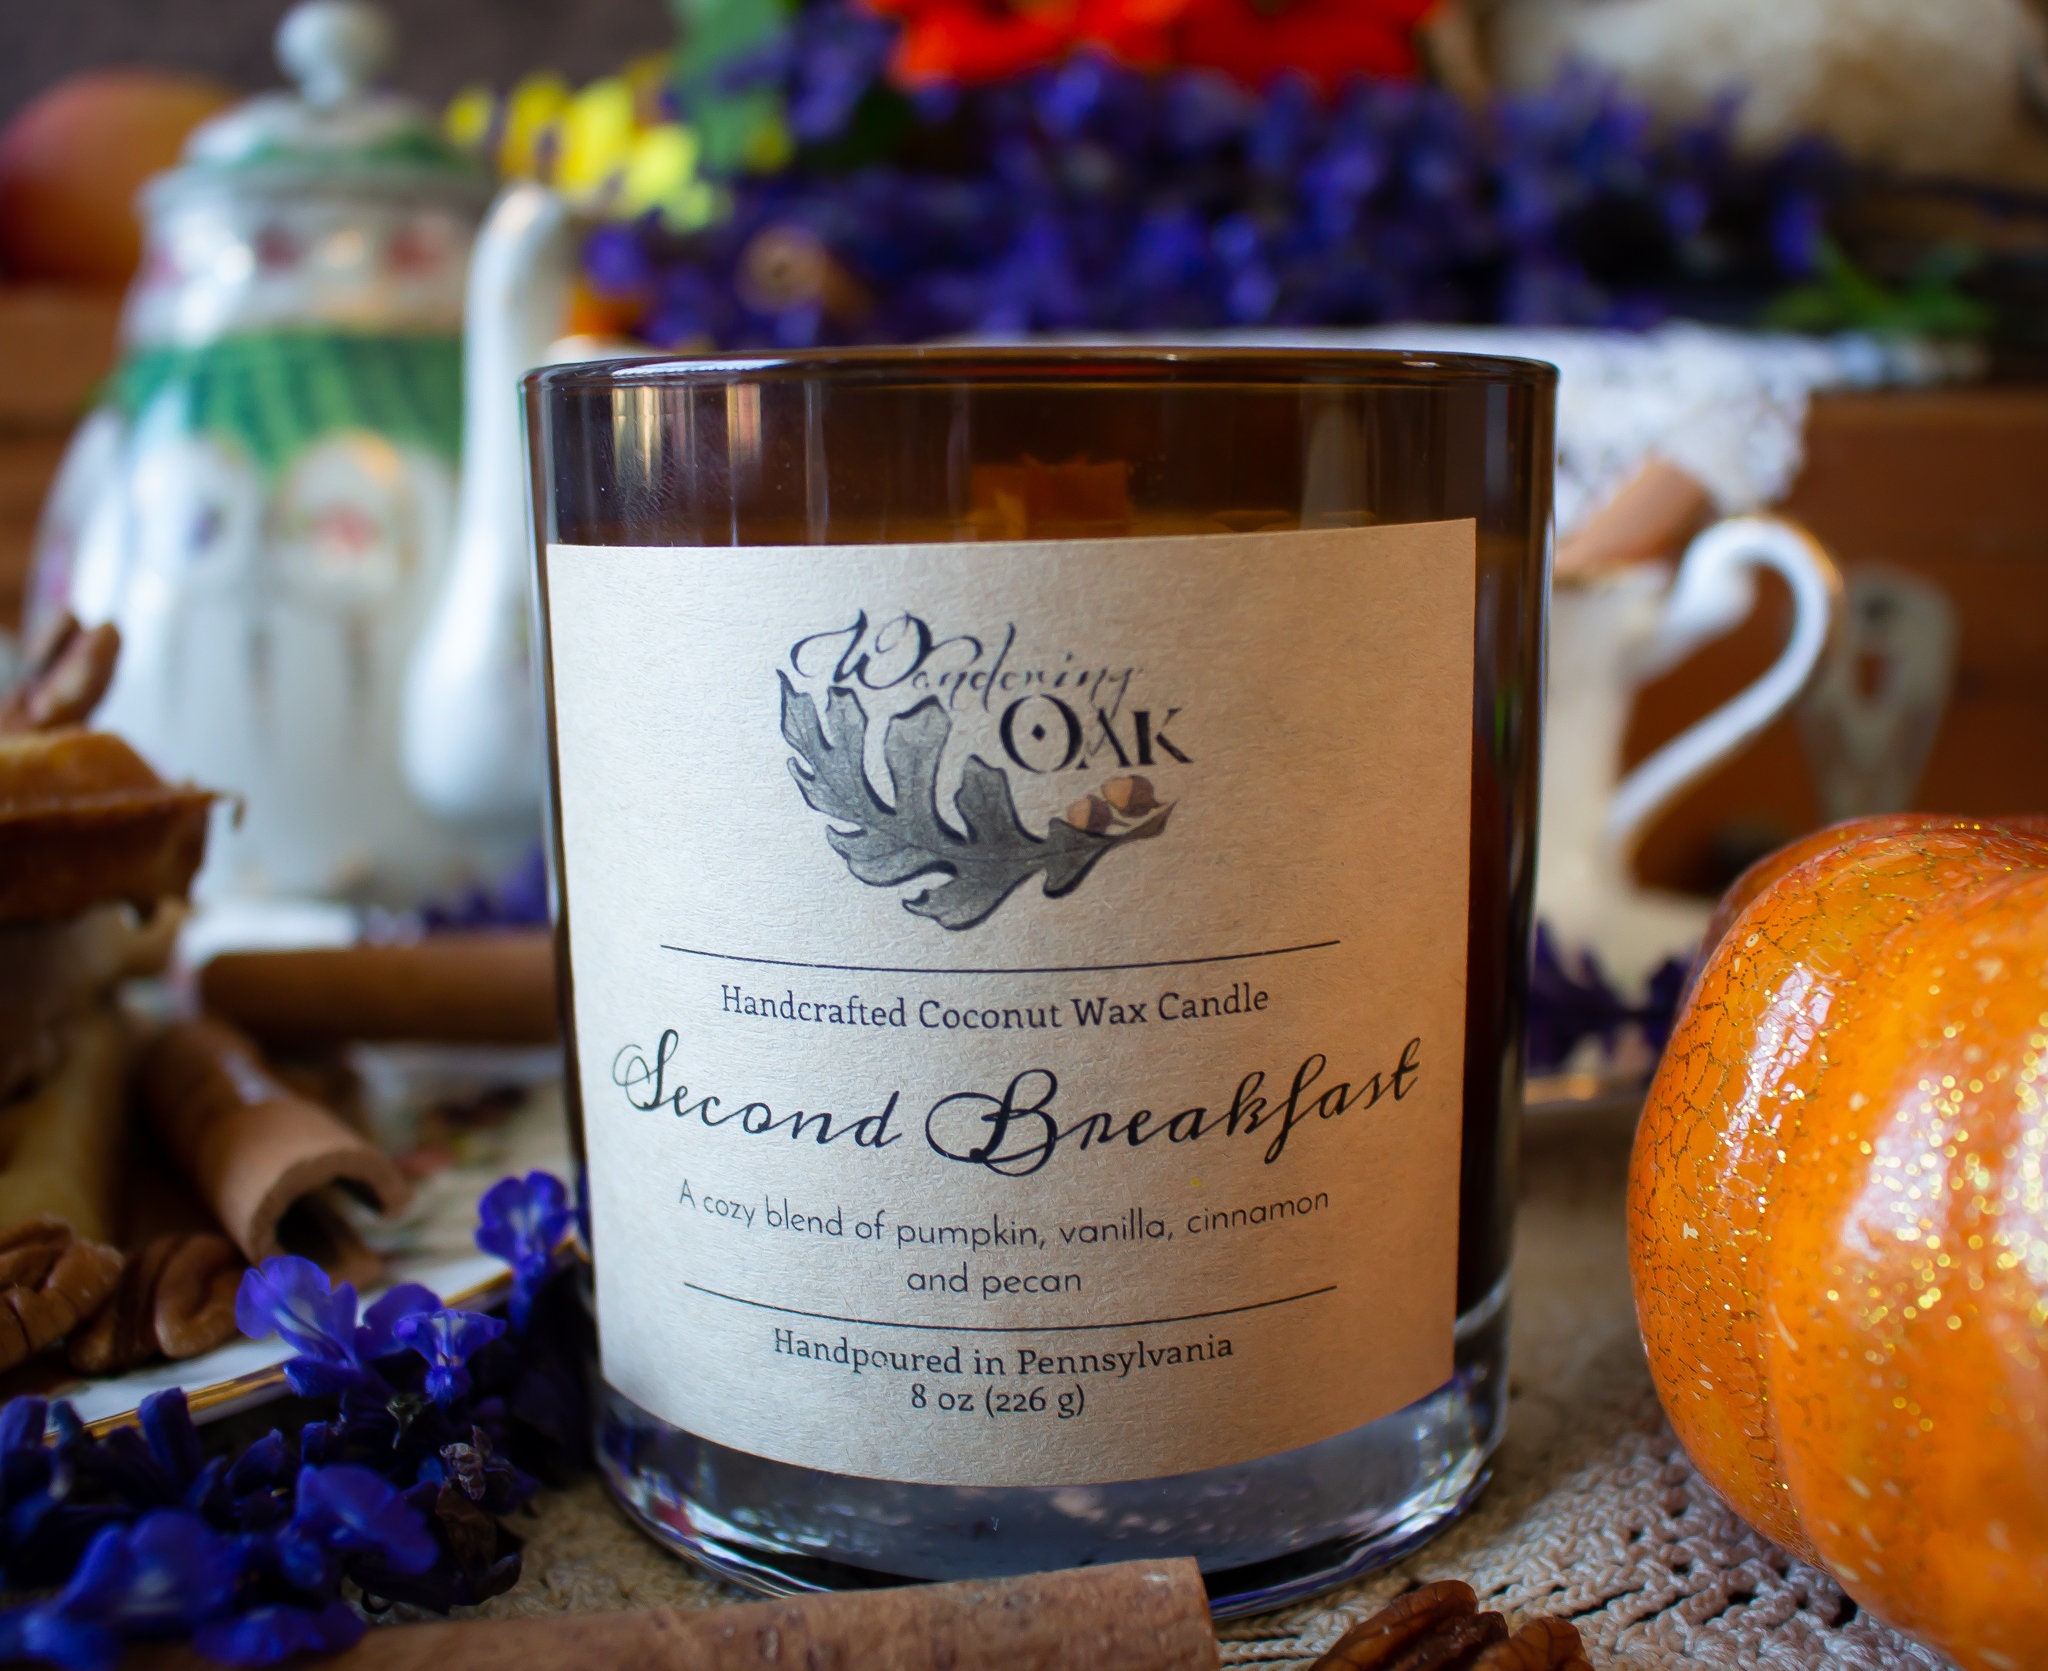 Haunting Fog 7 Oz. Candle, Glitter Infused, Wood Wick Candle, Witchcraft  Inspired, Fall Aesthetic, Room Decor 